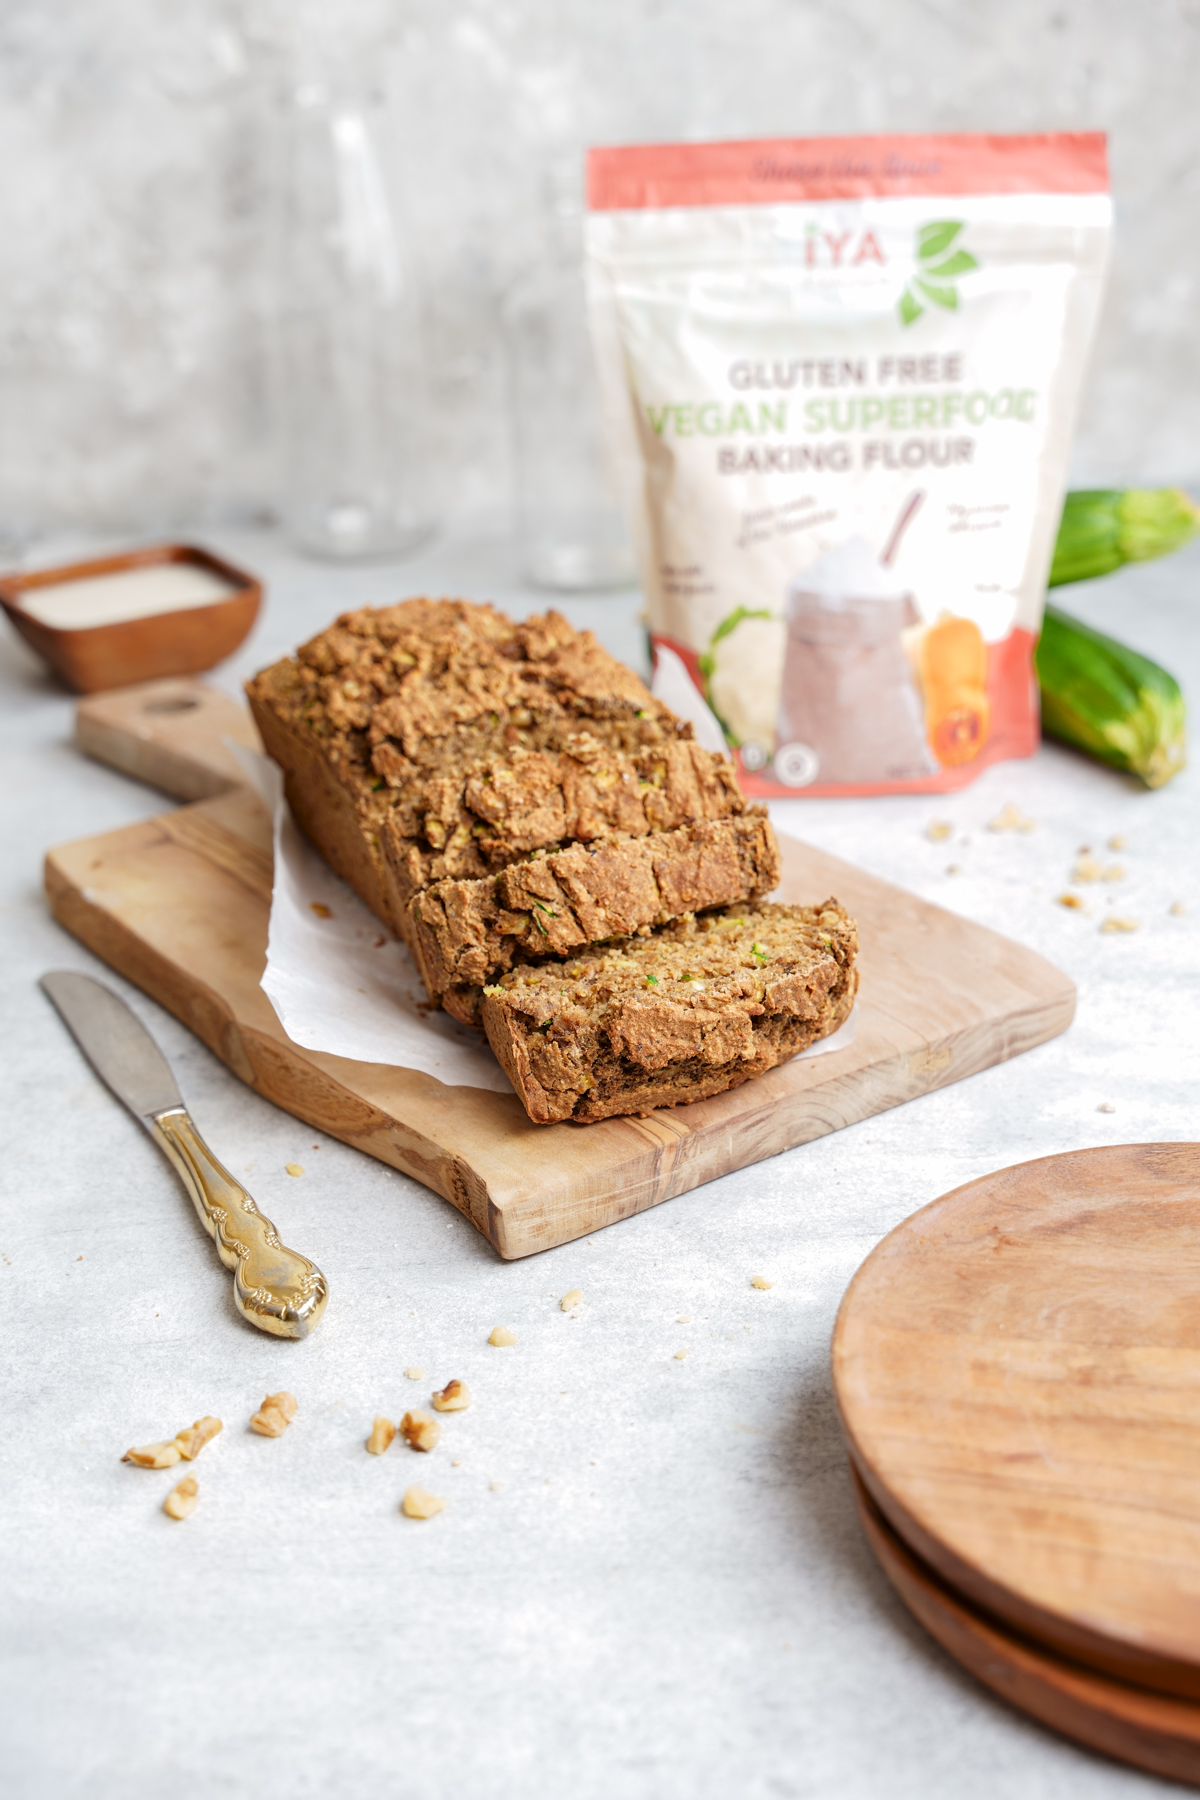 the zucchini loaf with the superfood powder flour